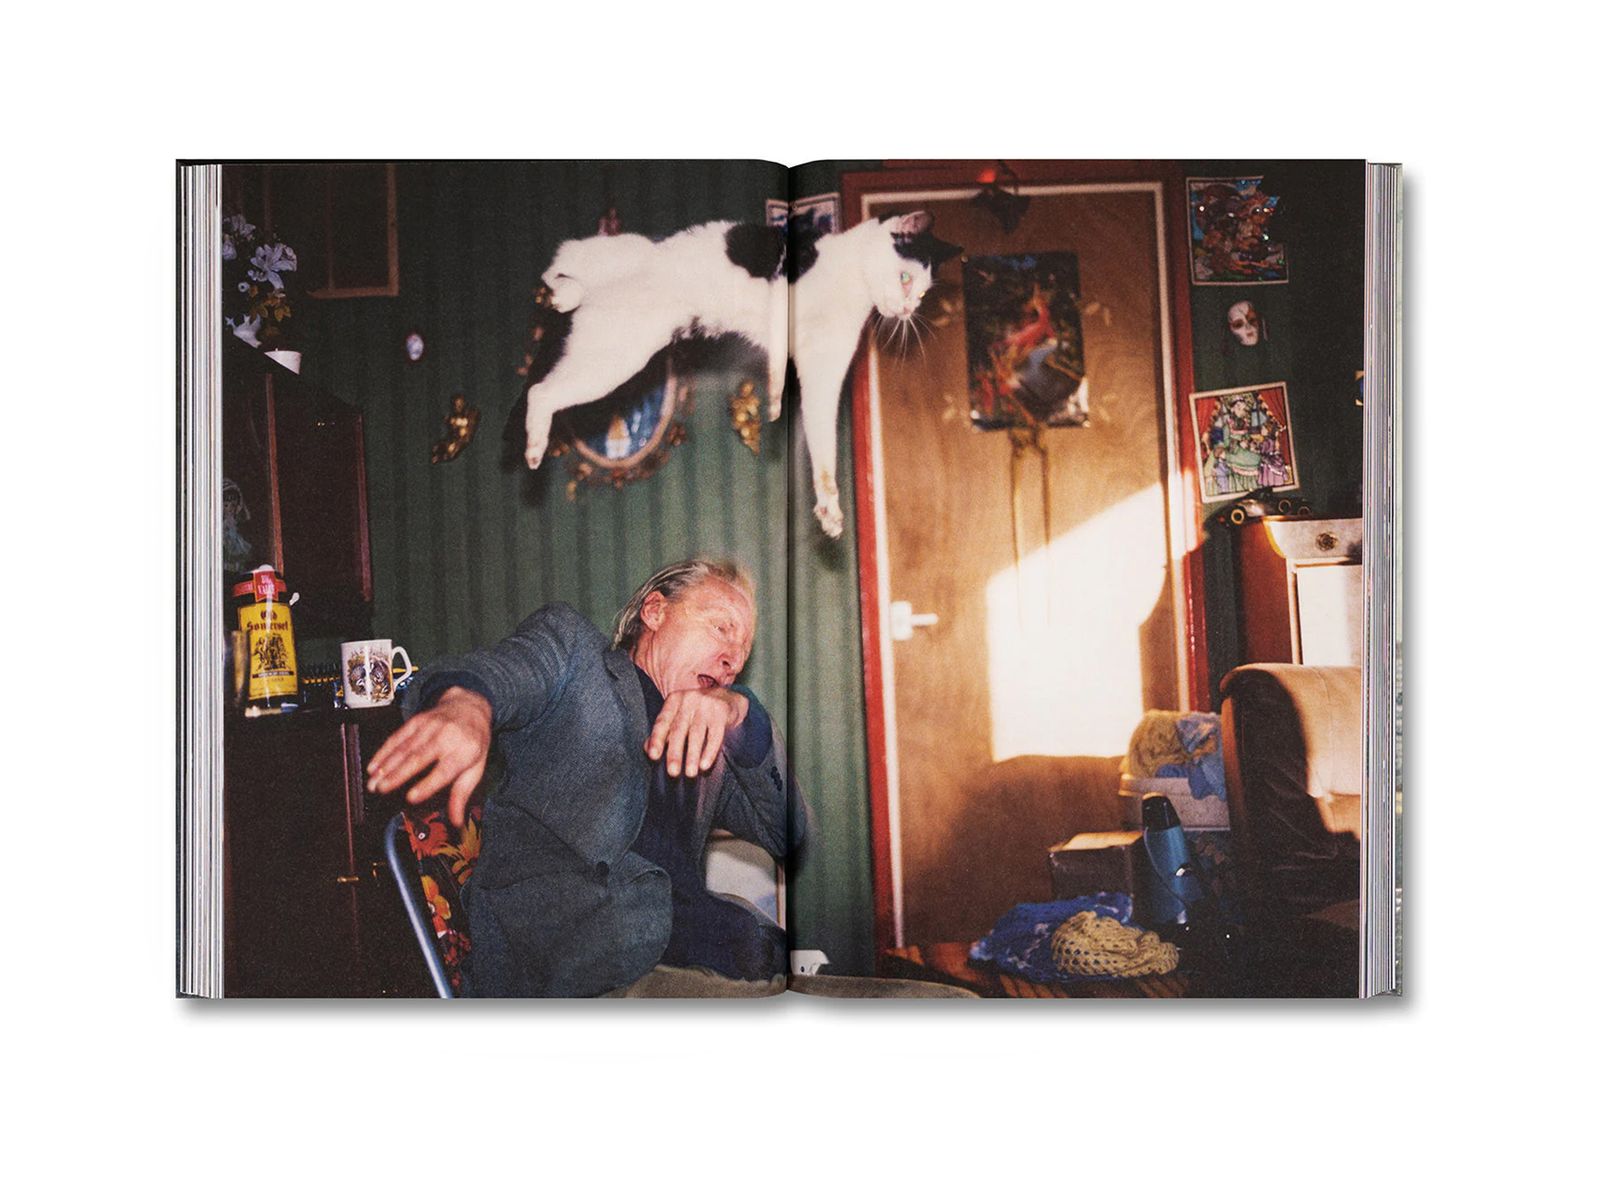 Photobook Review: Ray’s a Laugh by Richard Billingham